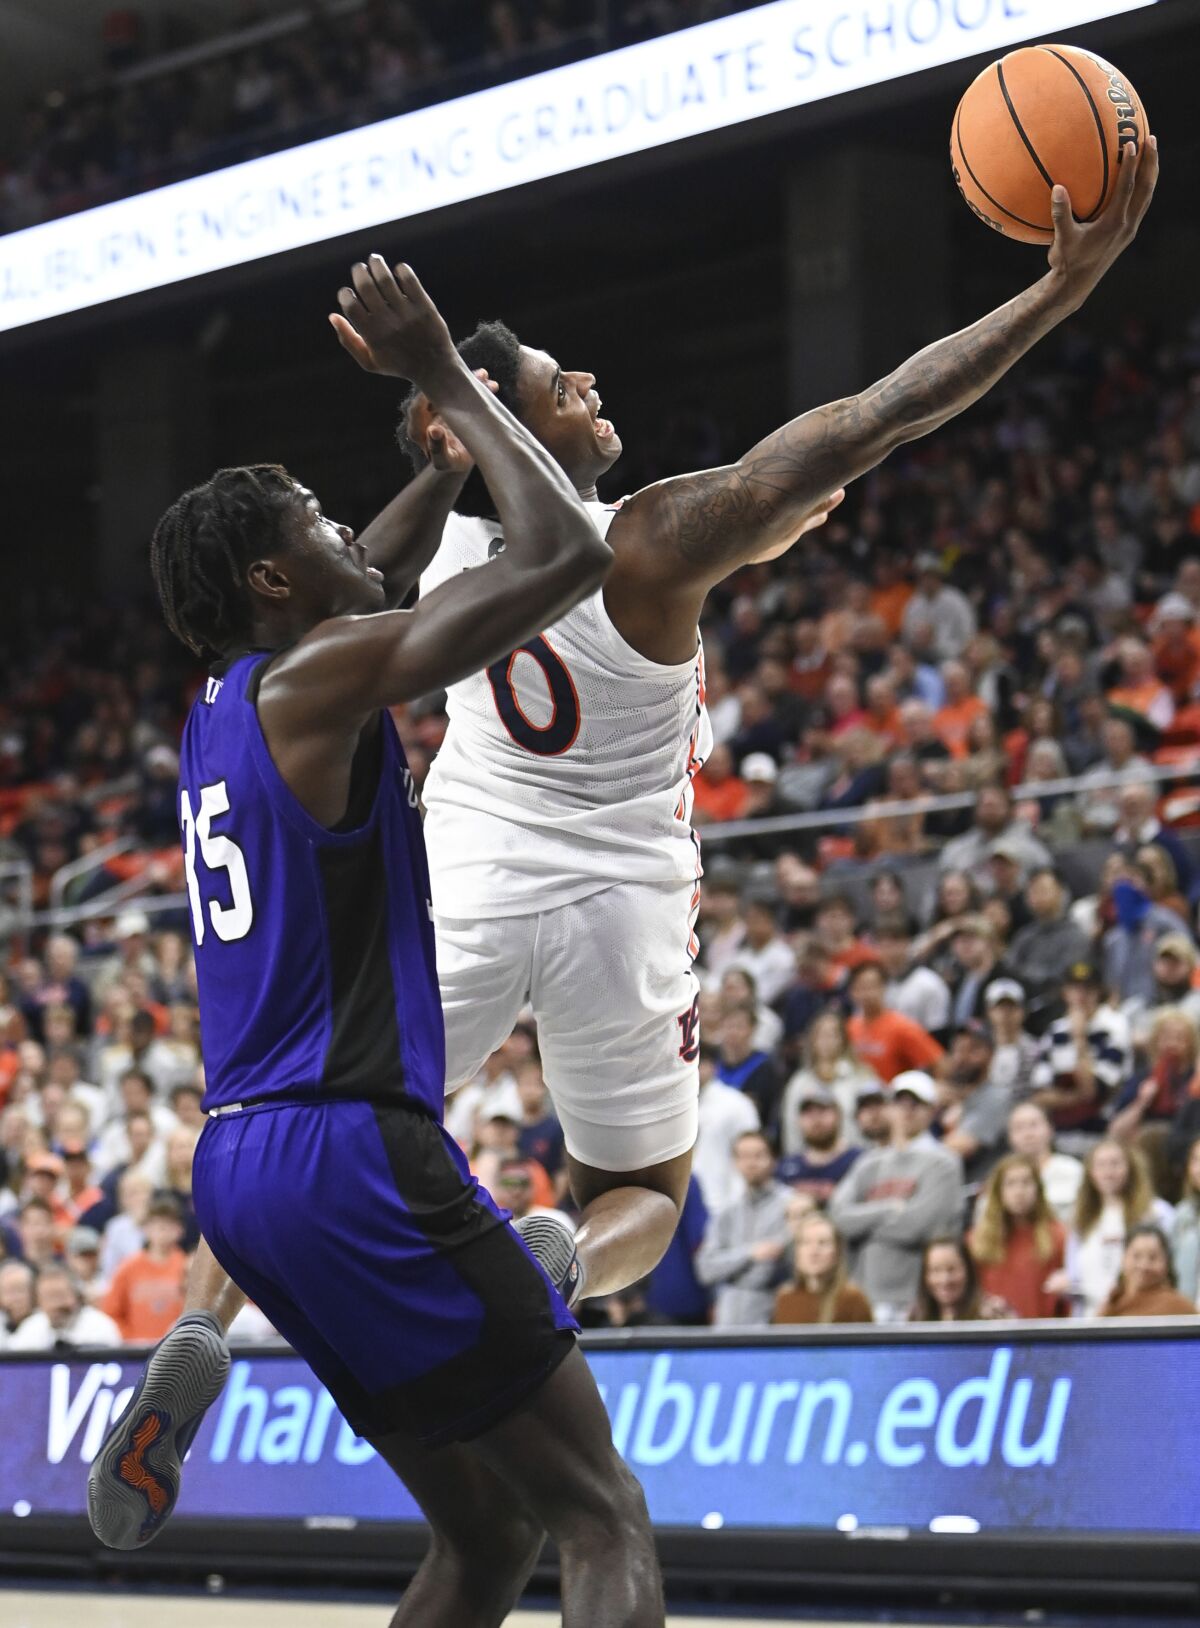 Auburn guard K.D. Johnson (0) scores two points as North Alabama forward Pape Momar Cisse (35) defends during the first half of an NCAA college basketball game Tuesday, Dec. 14, 2021, in Auburn, Ala. (AP Photo/Julie Bennett)